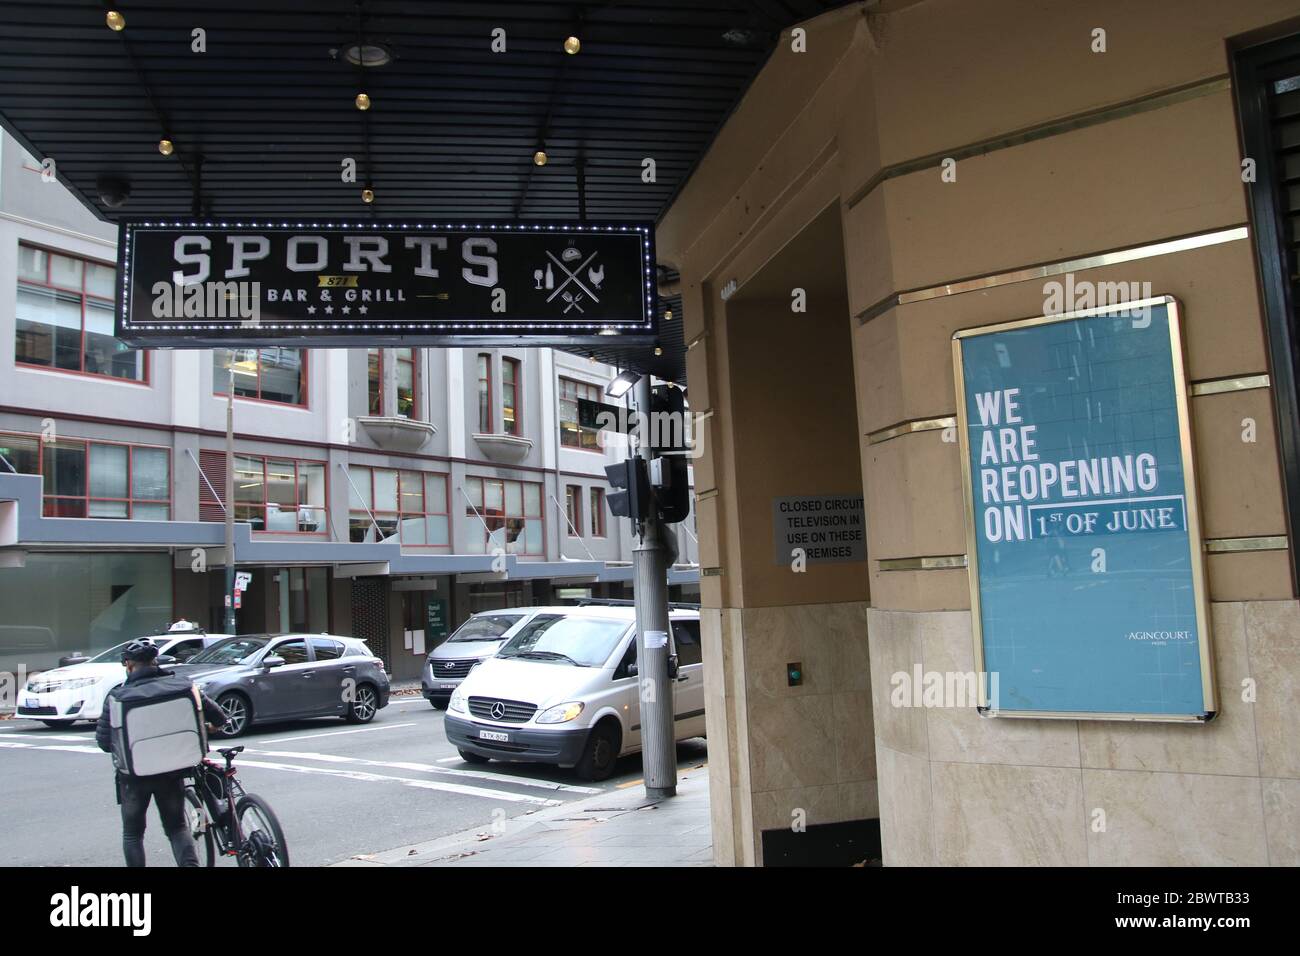 Sports Bar & Grill in Sydney reopens on 1 June 2020 after being shut during the coronavirus (Covid-19) lockdown. Credit: Richard Milnes/Alamy Stock Photo